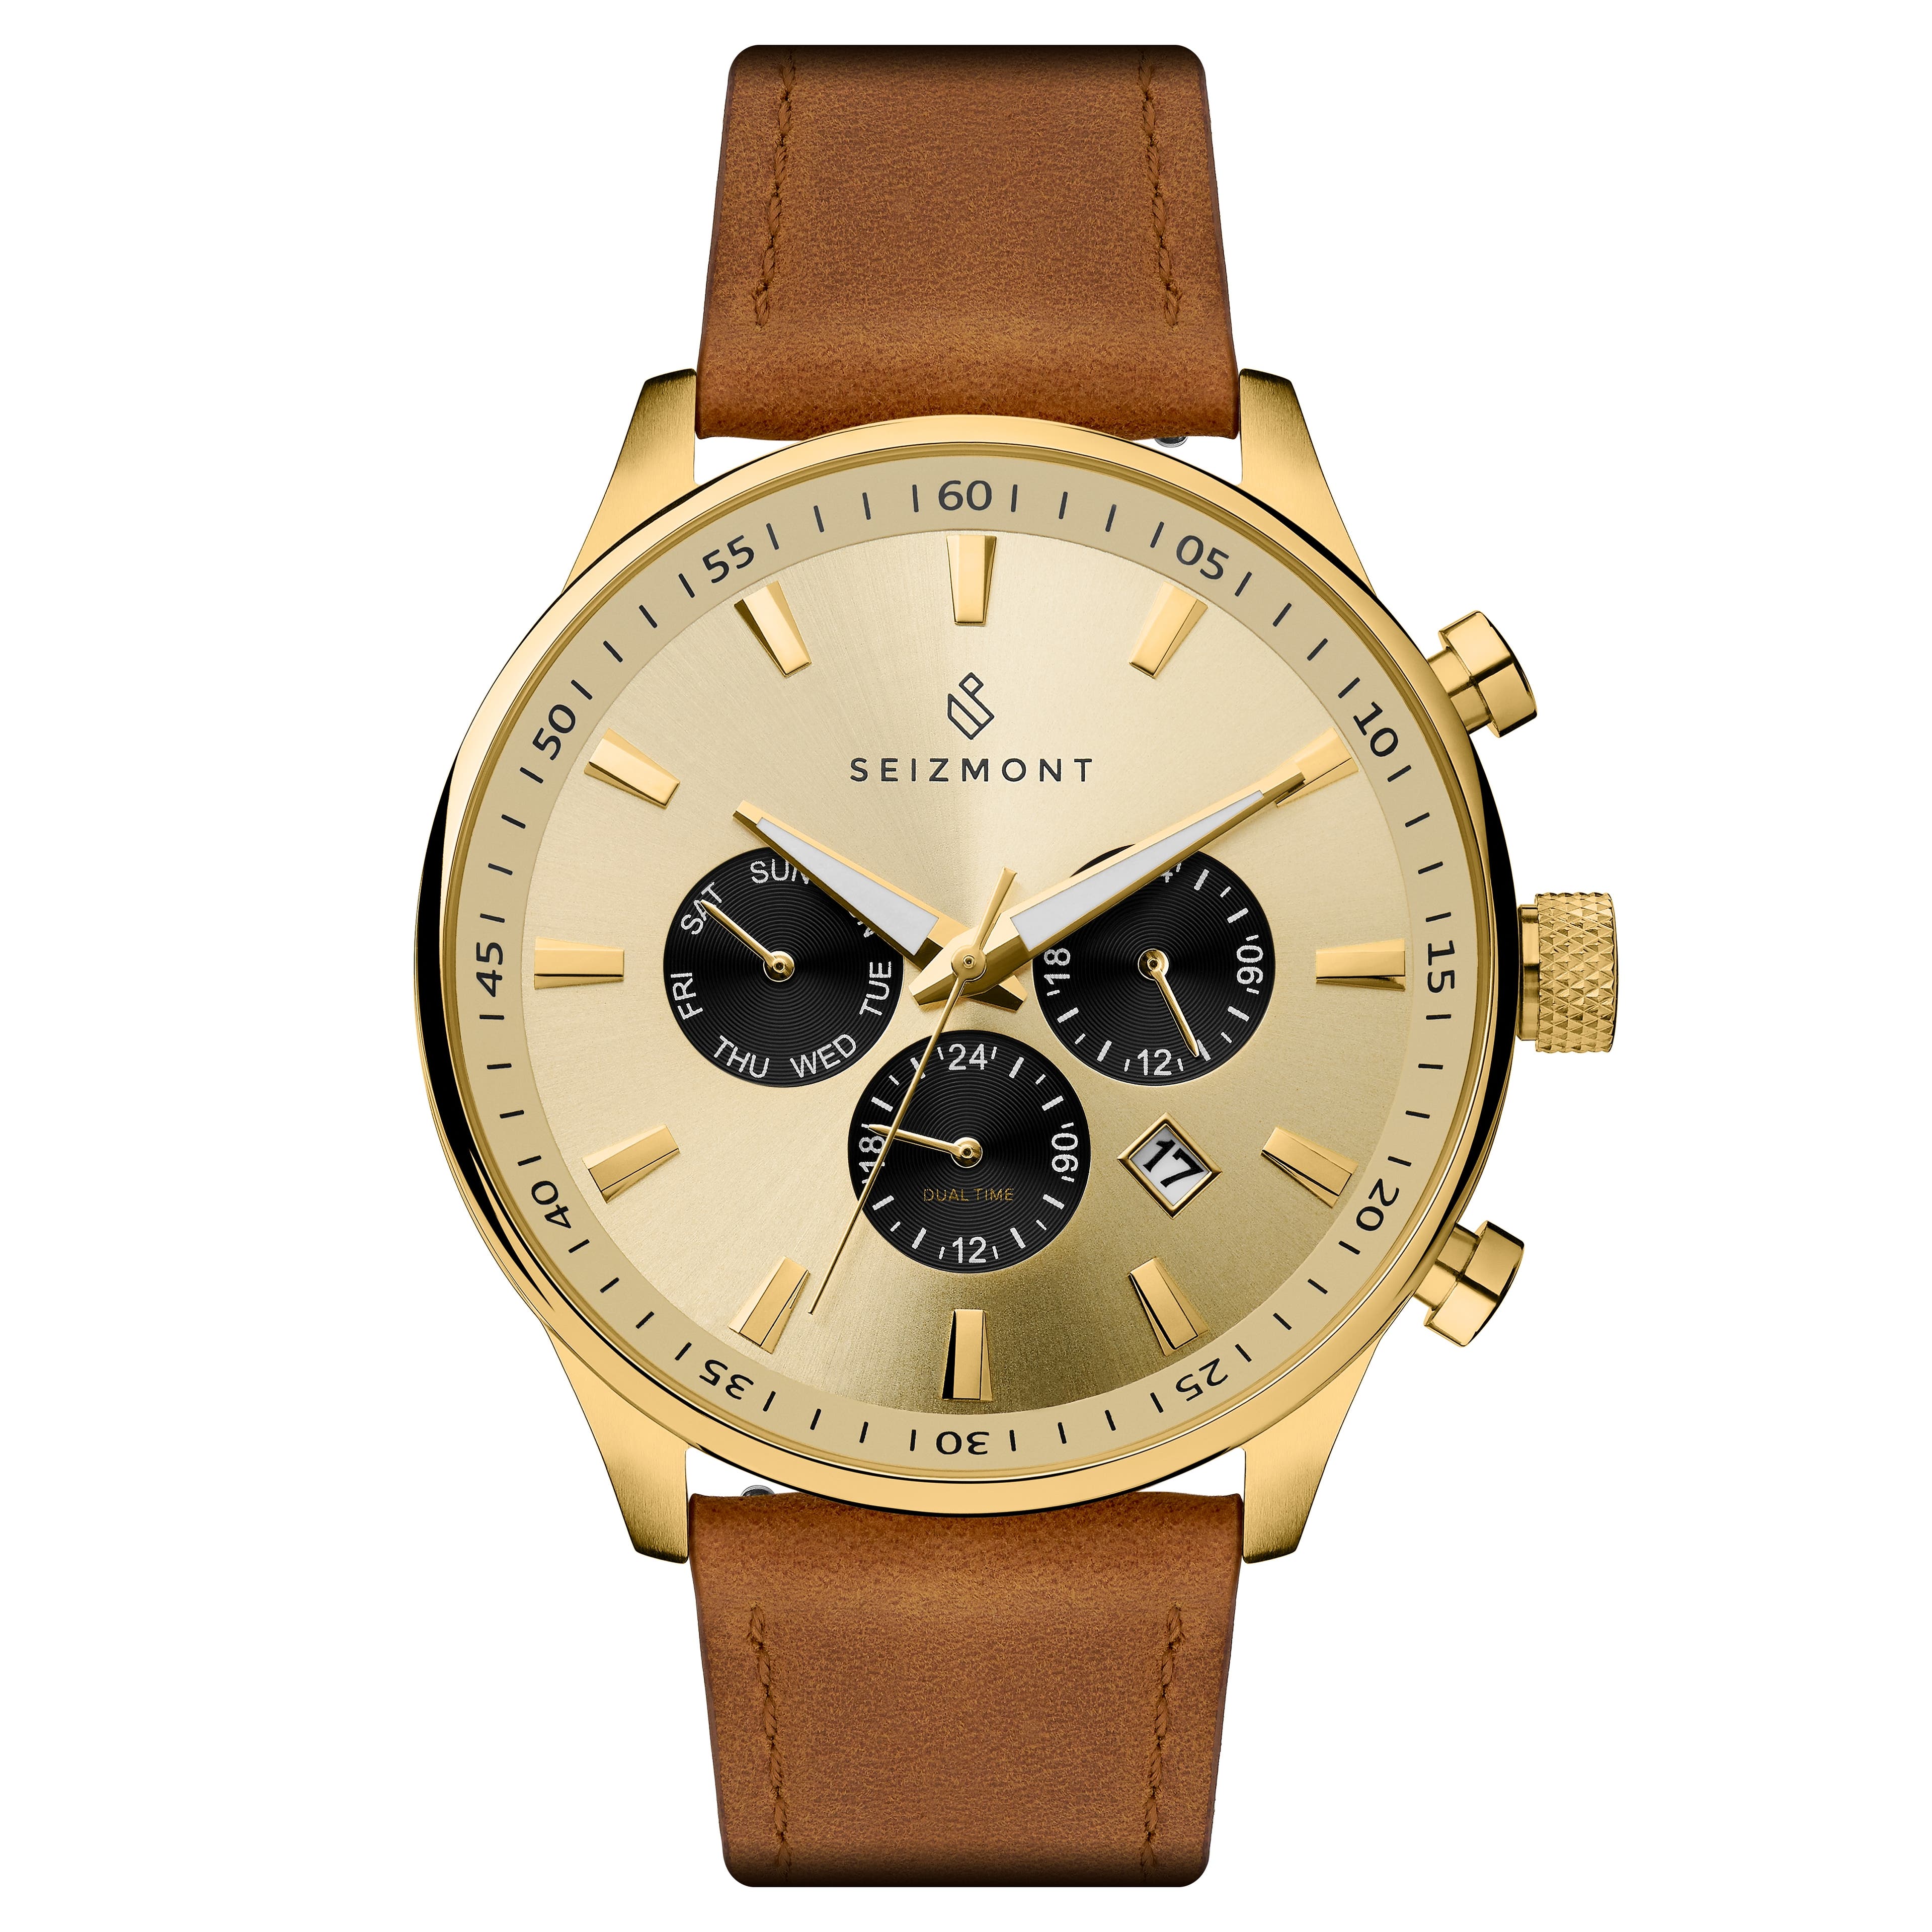 Troika II | Gold-Tone Dual-Time Watch With Gold-Tone Dial, Black Subdials & Brown Leather Strap